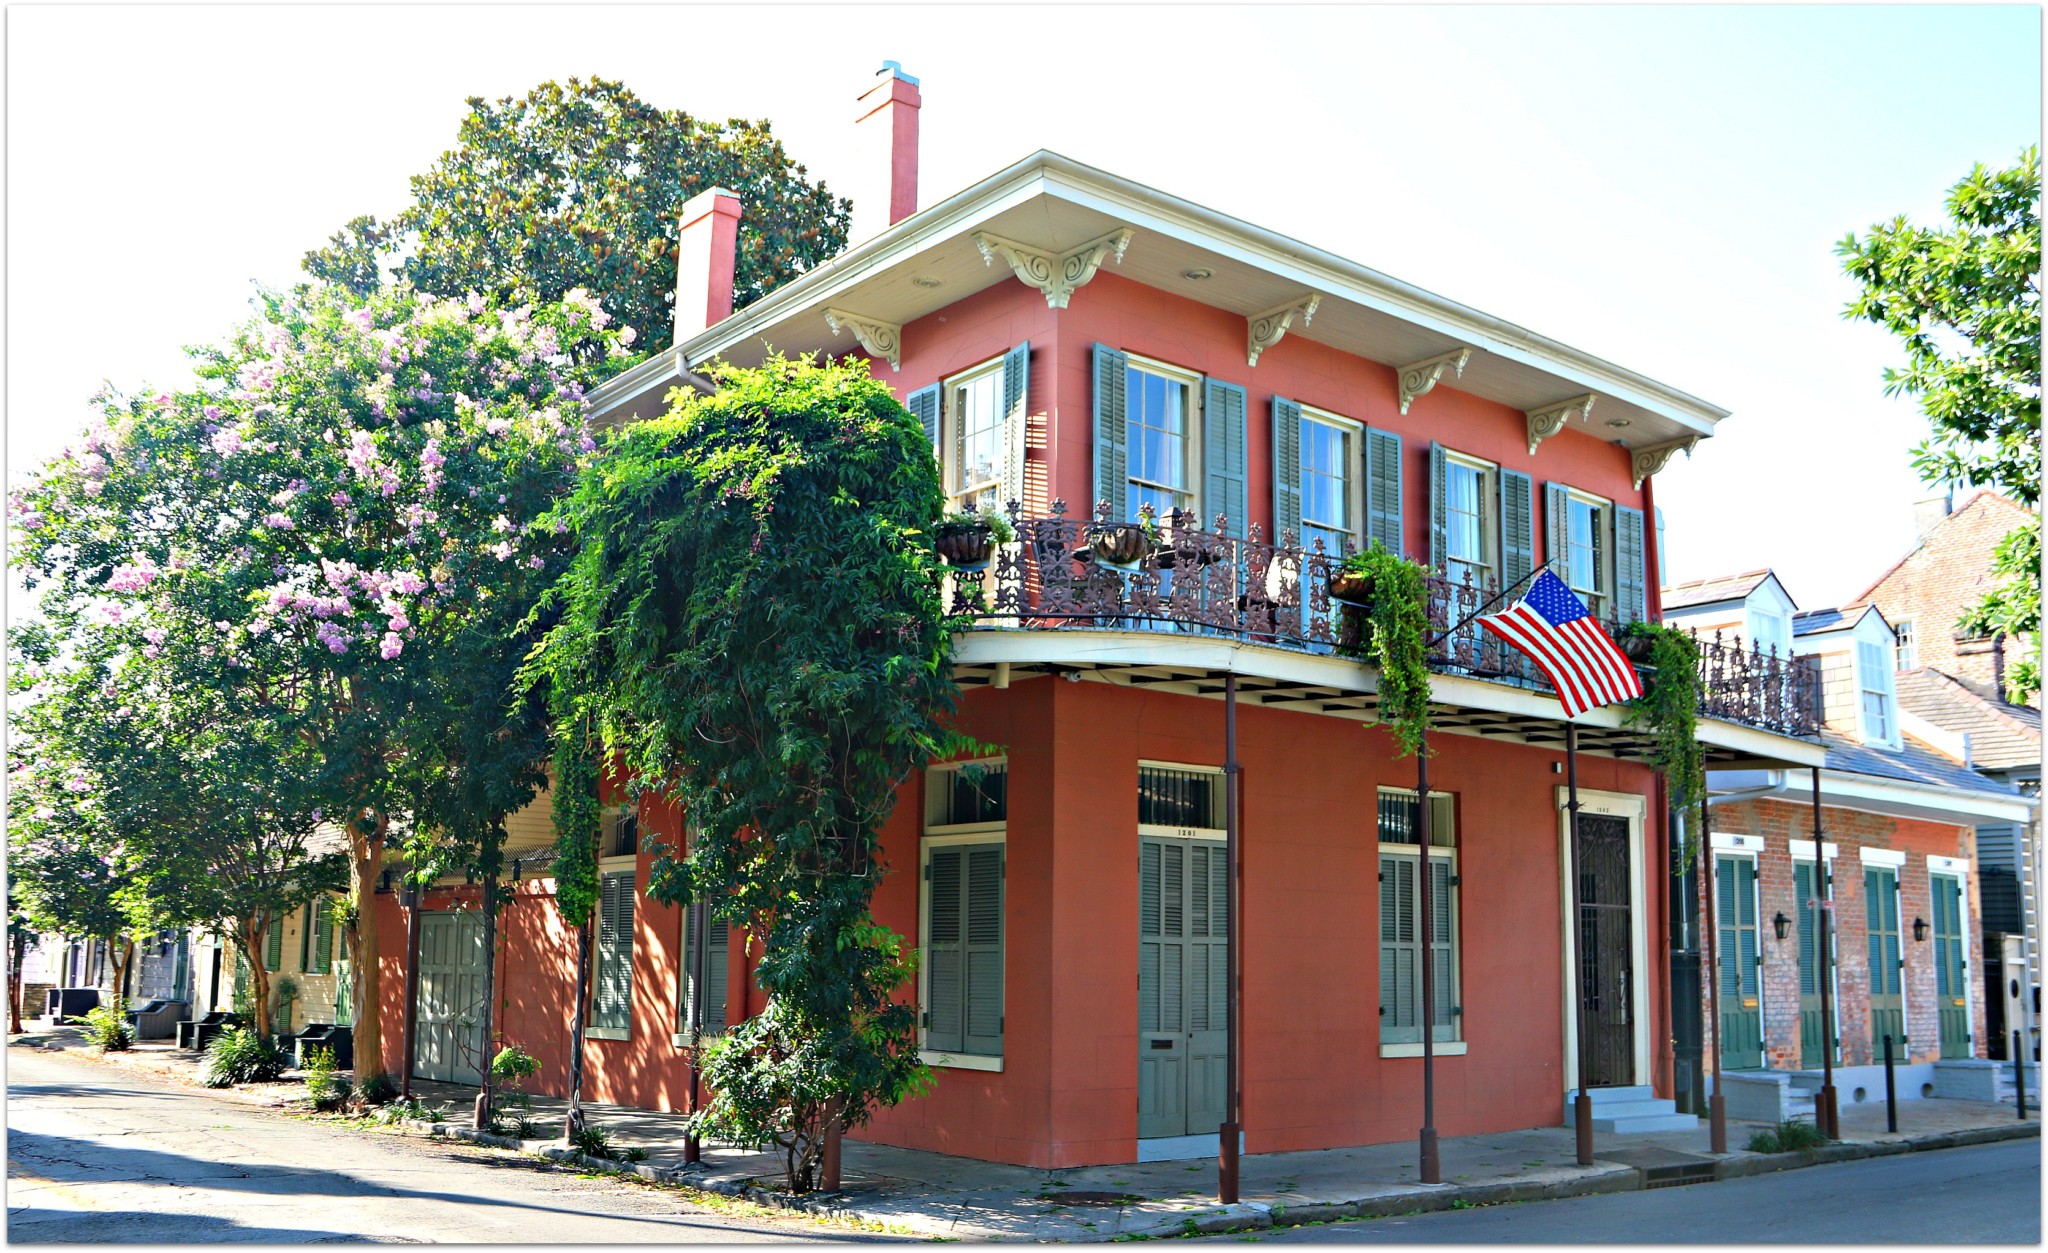 HOmes in French Quarter of New Orleans